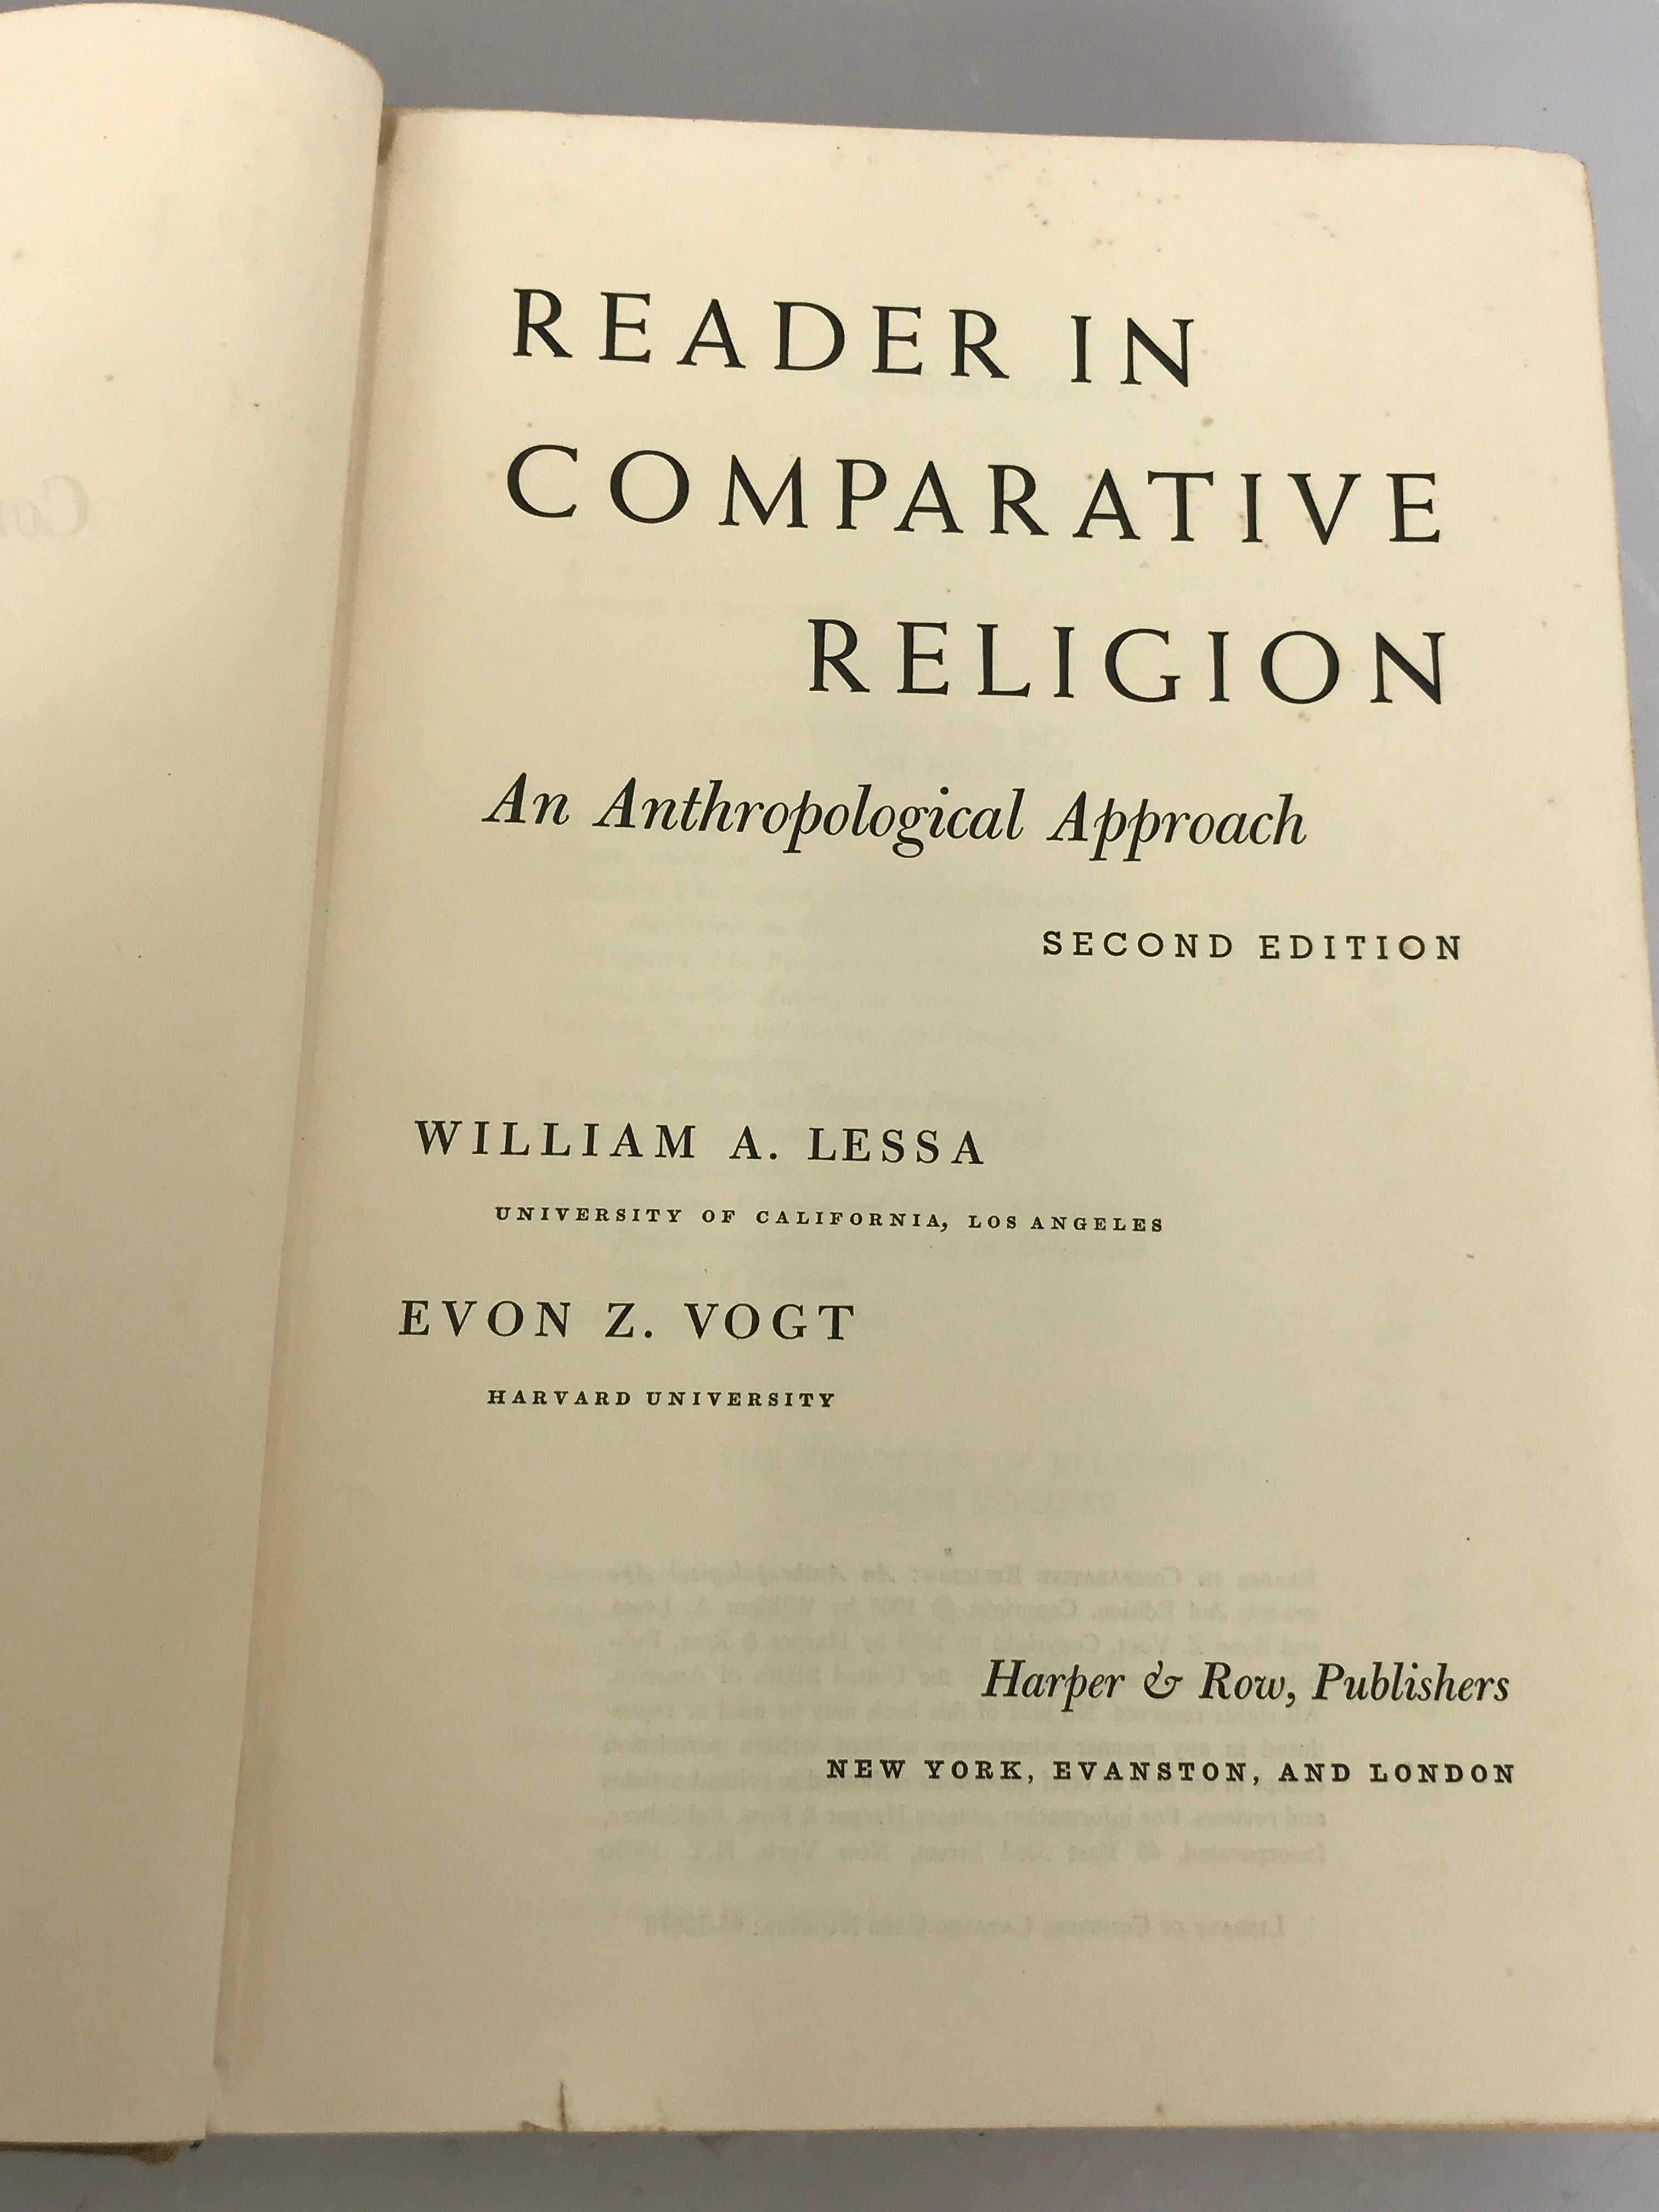 Reader in Comparative Religion by Lessa and Vogt 1965 Second Edition HC